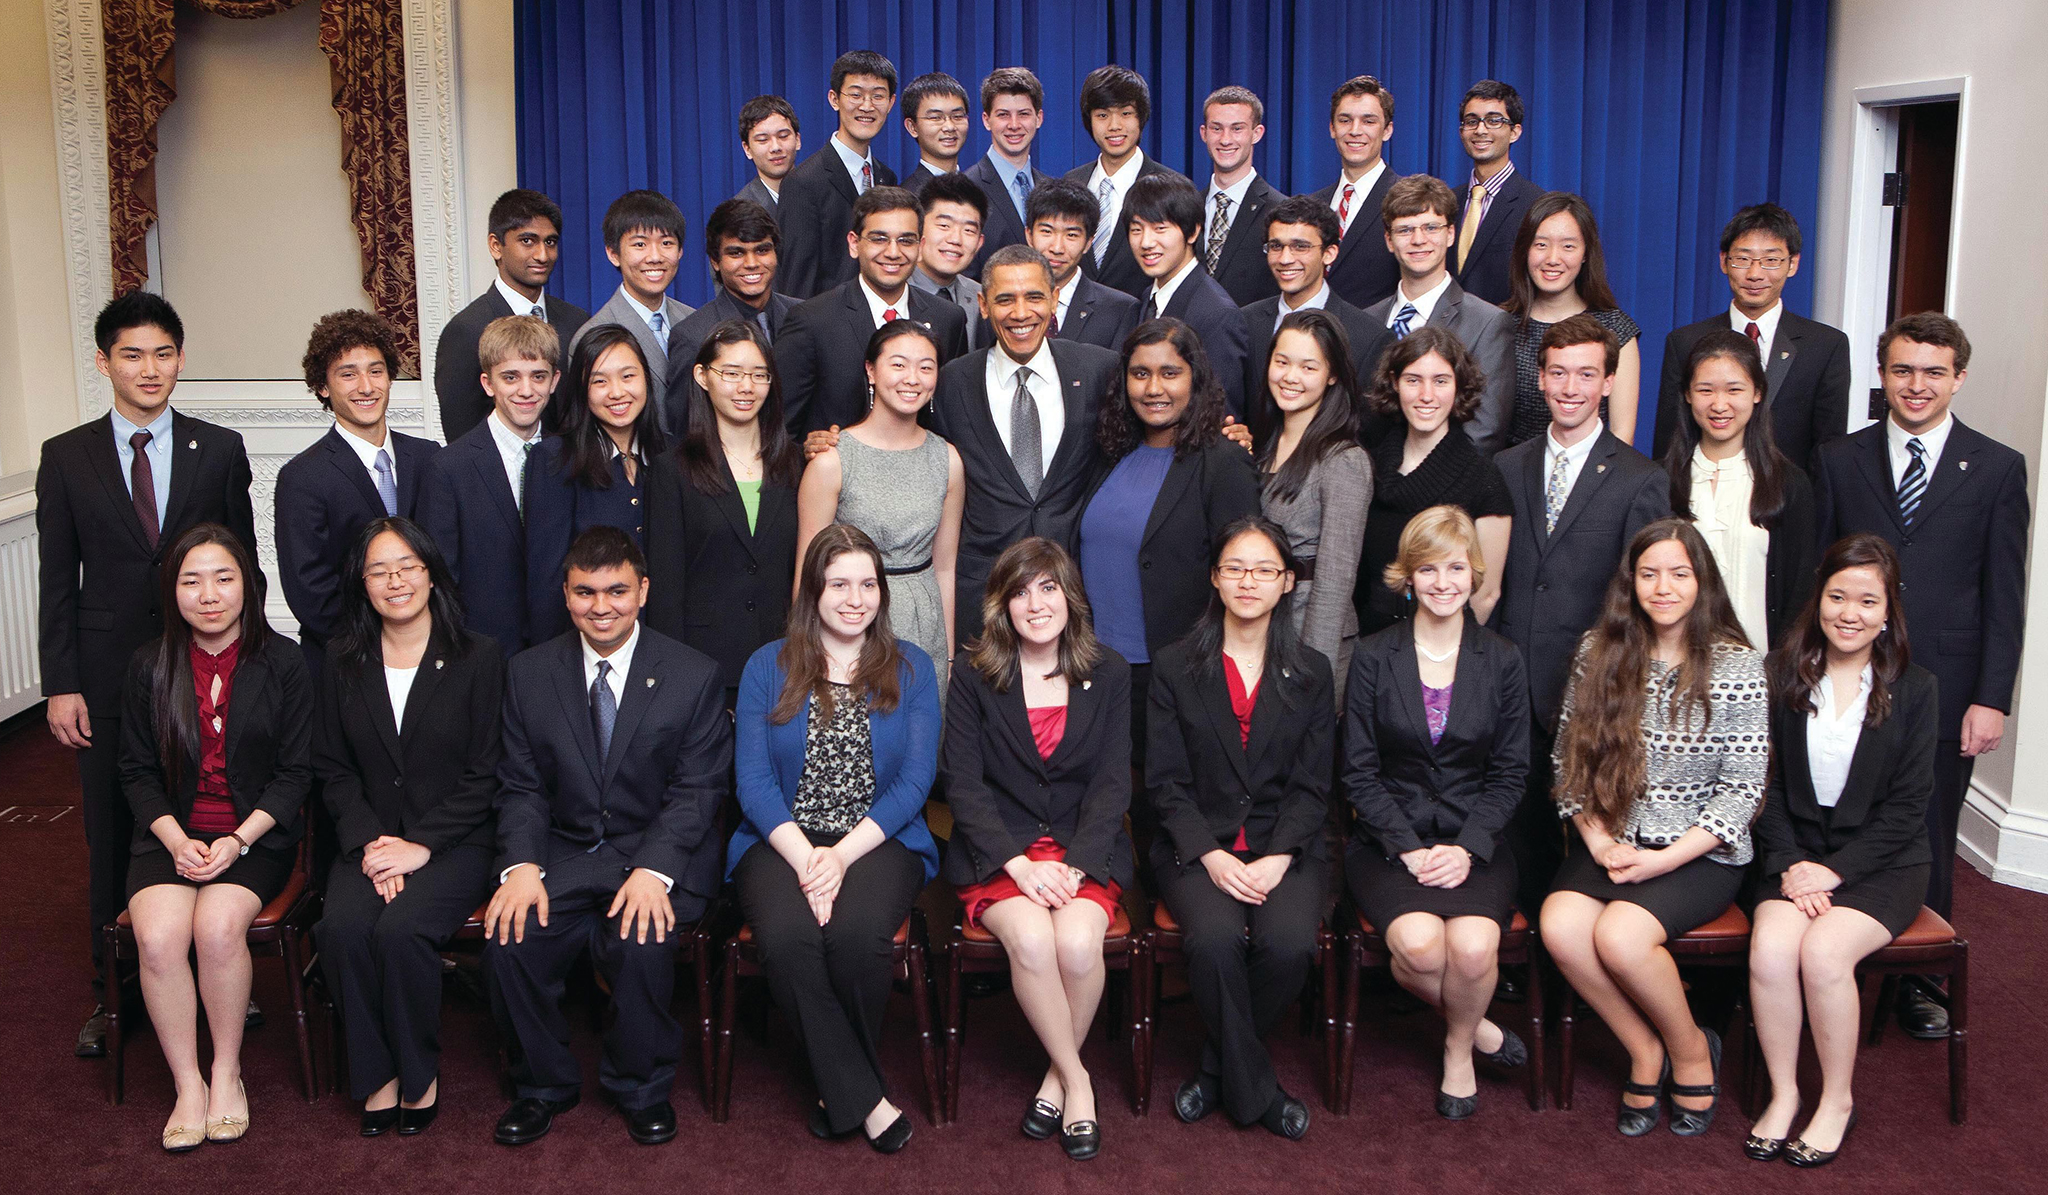 STS finalists pose with President Obama at the White House